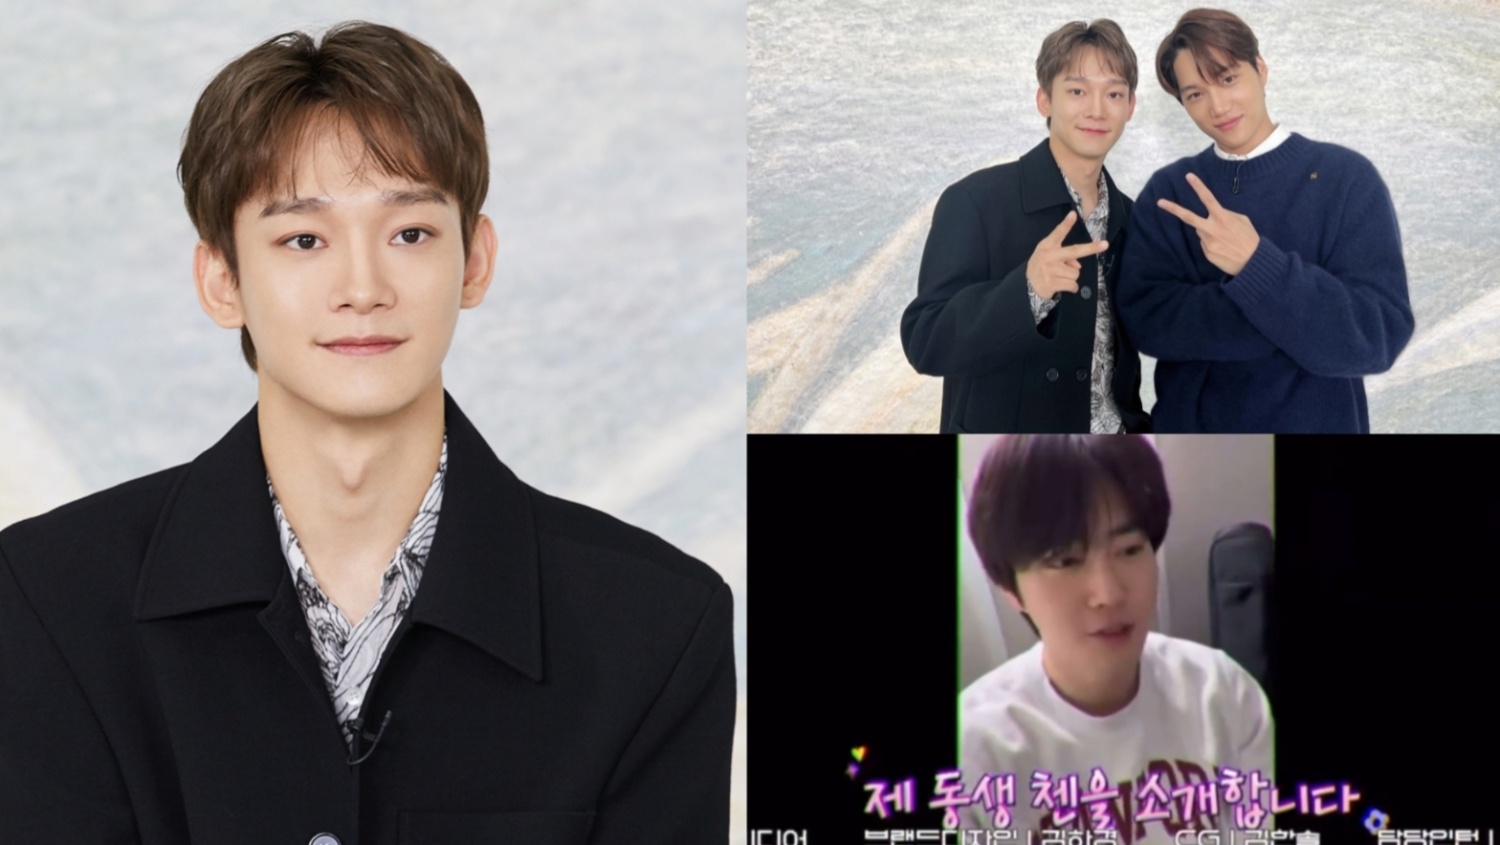 Chen Garners Mixes Reactions to “Abusing” EXO Members in Solo Promotion